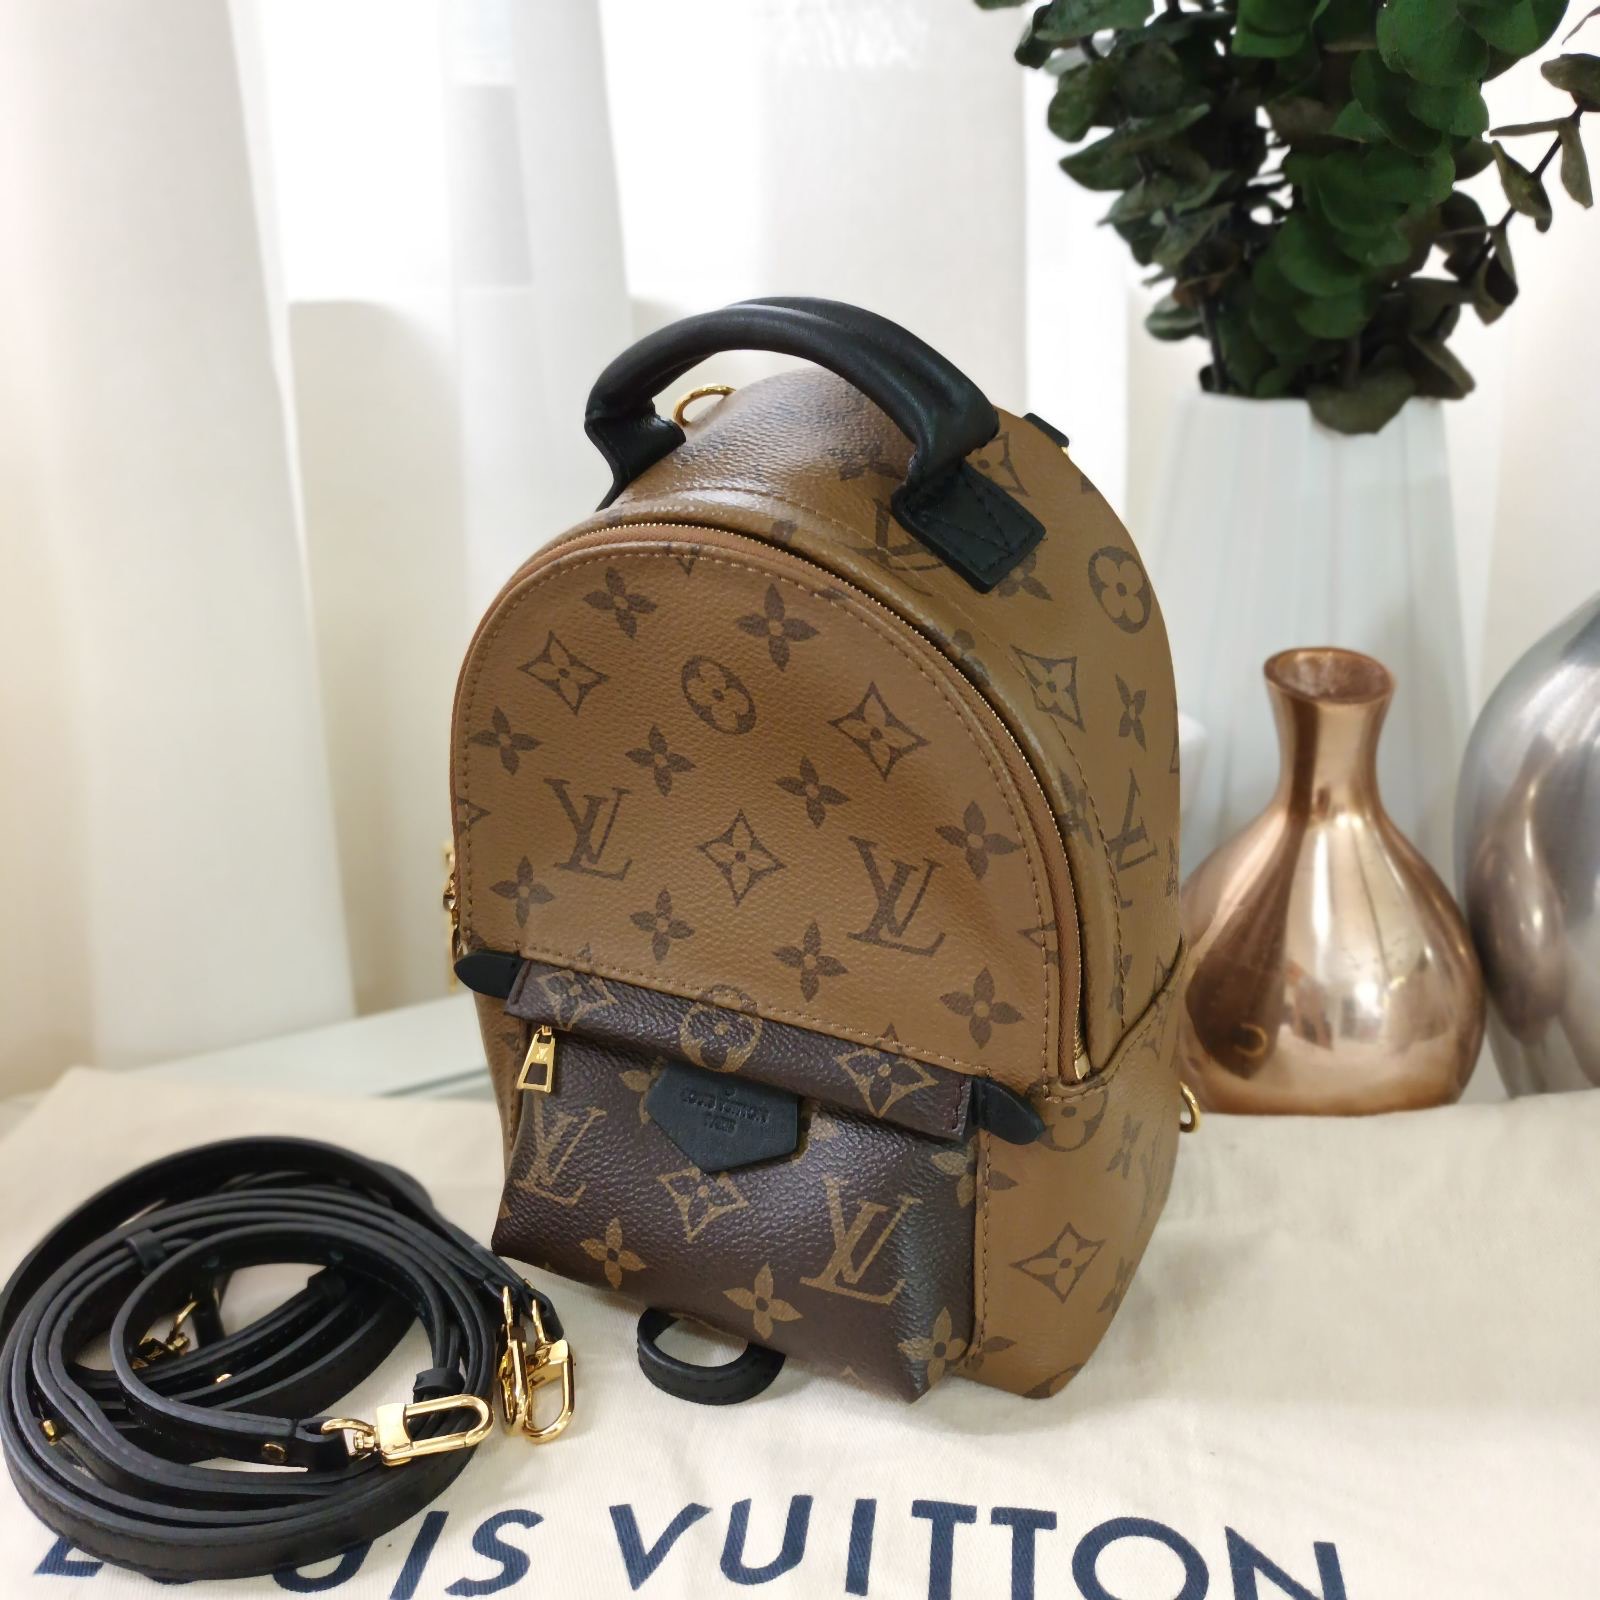 Organizer for Tiny Backpack Louis Vuitton Organizers Bag 